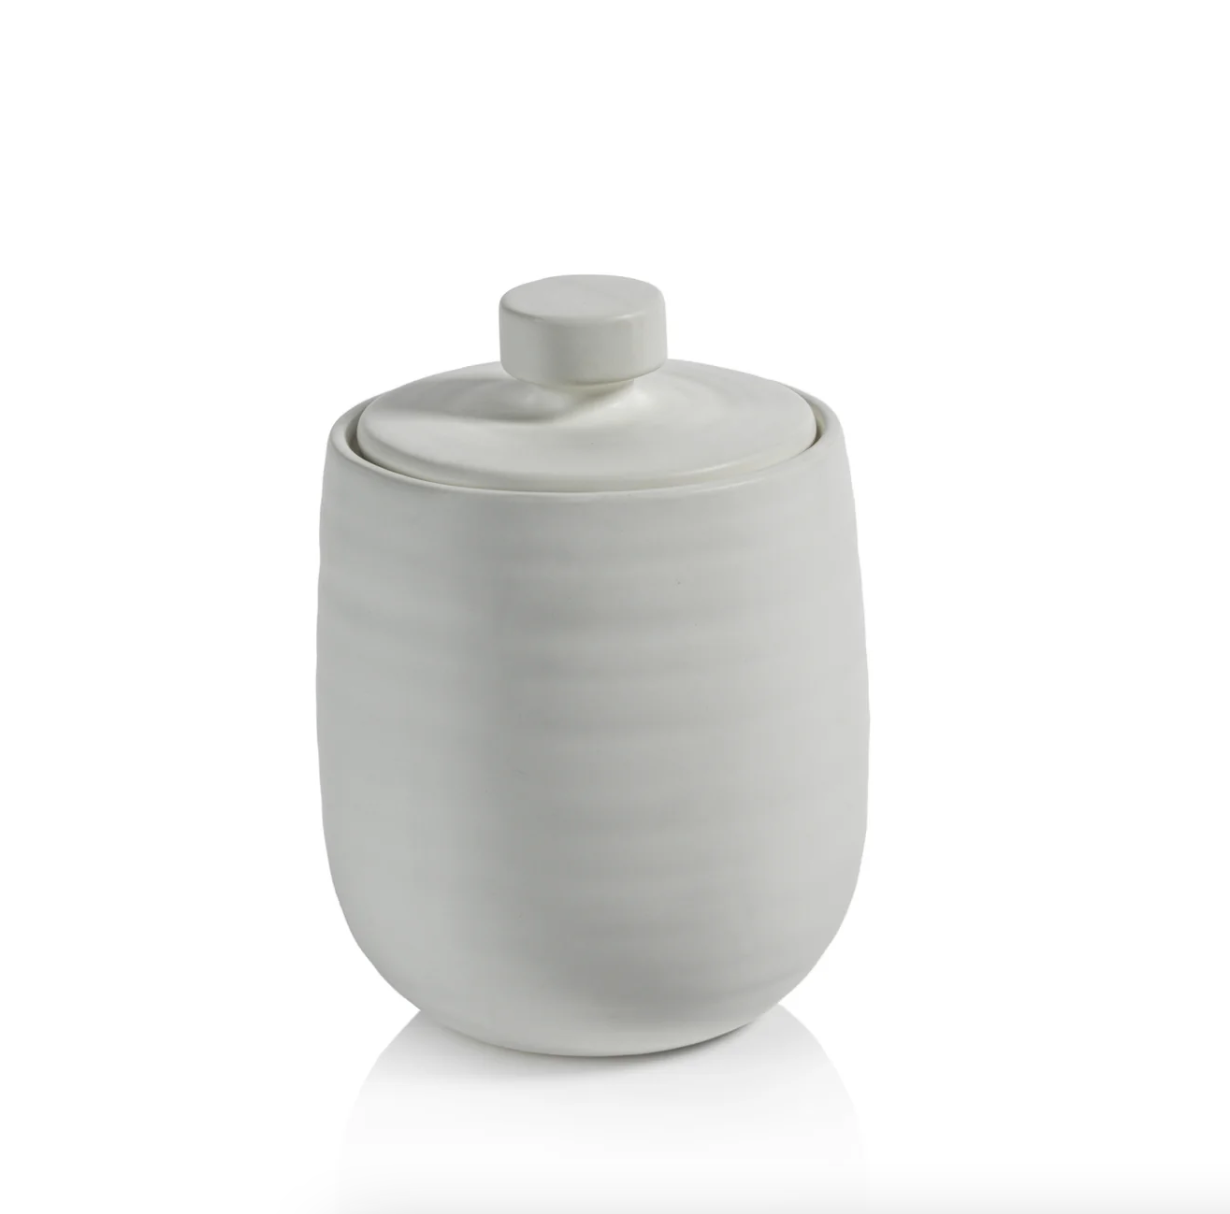 A simple white ceramic Arpège Lidded Jar - Small with a lid, featuring vertical grooves and a matte finish in Bungalow style, isolated on a white background. (Brand Name: Zodax)